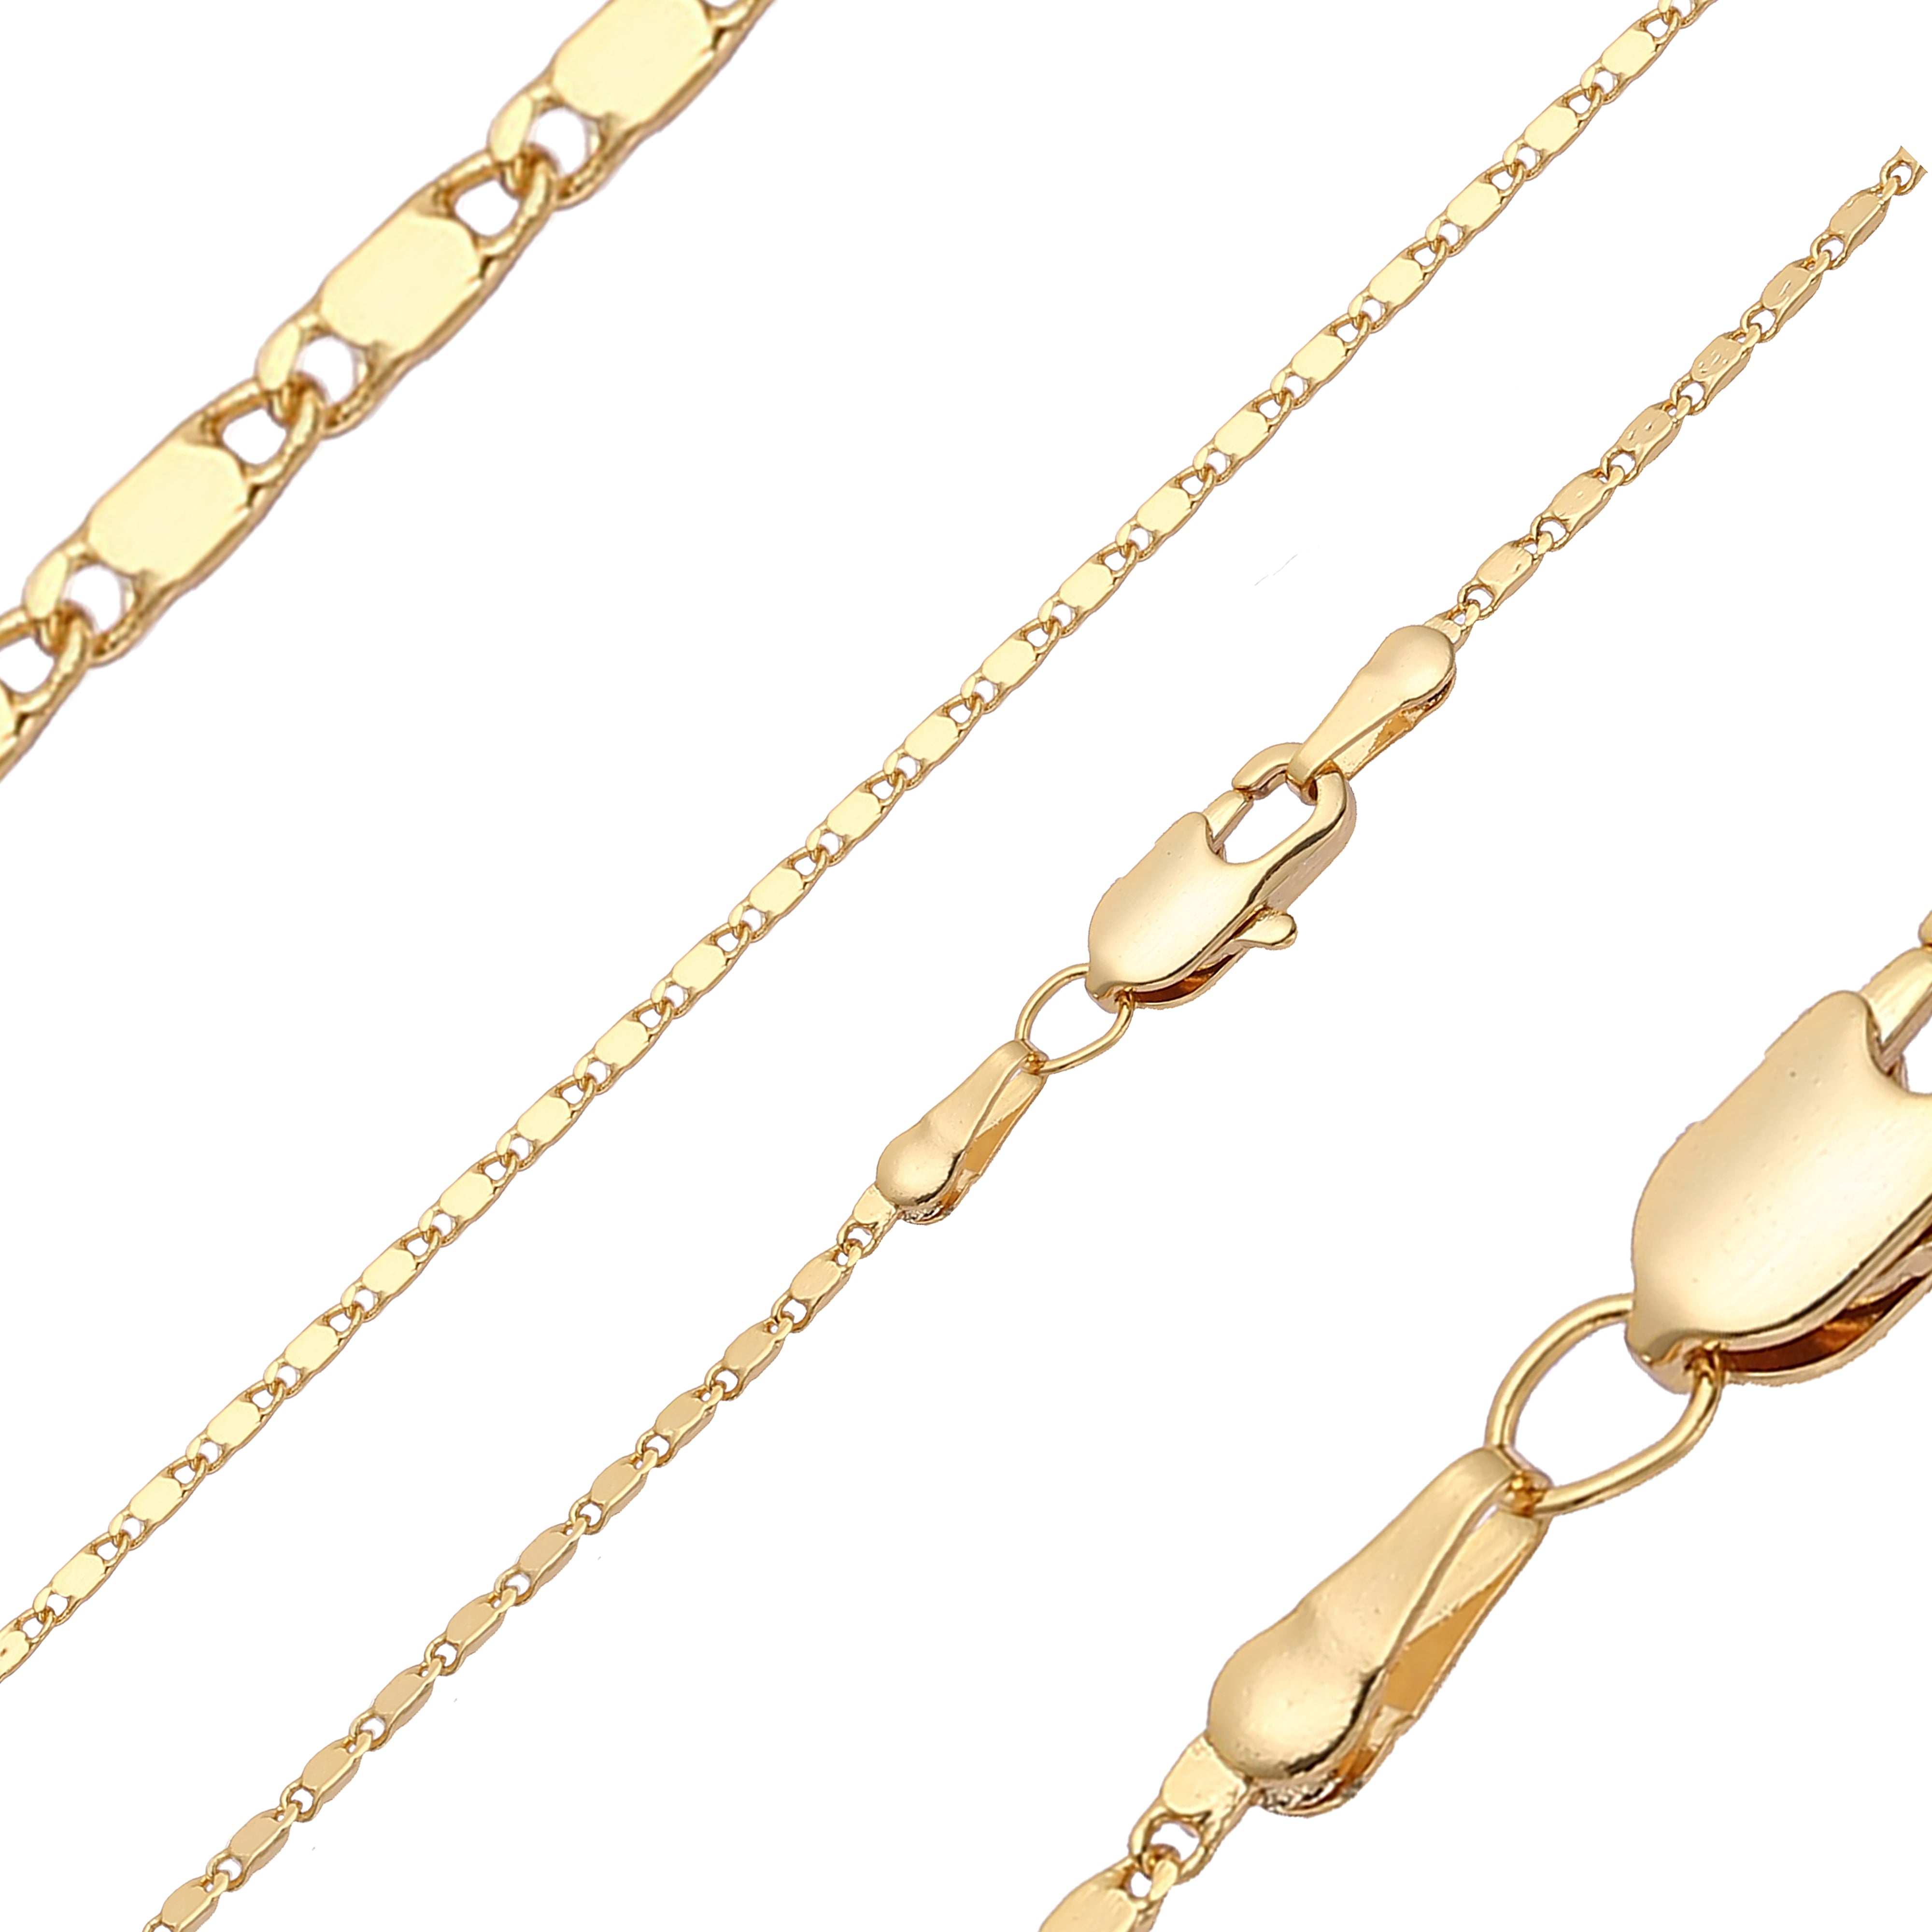 Slim solid snail link polished chains plated in 14K Gold, Rose Gold